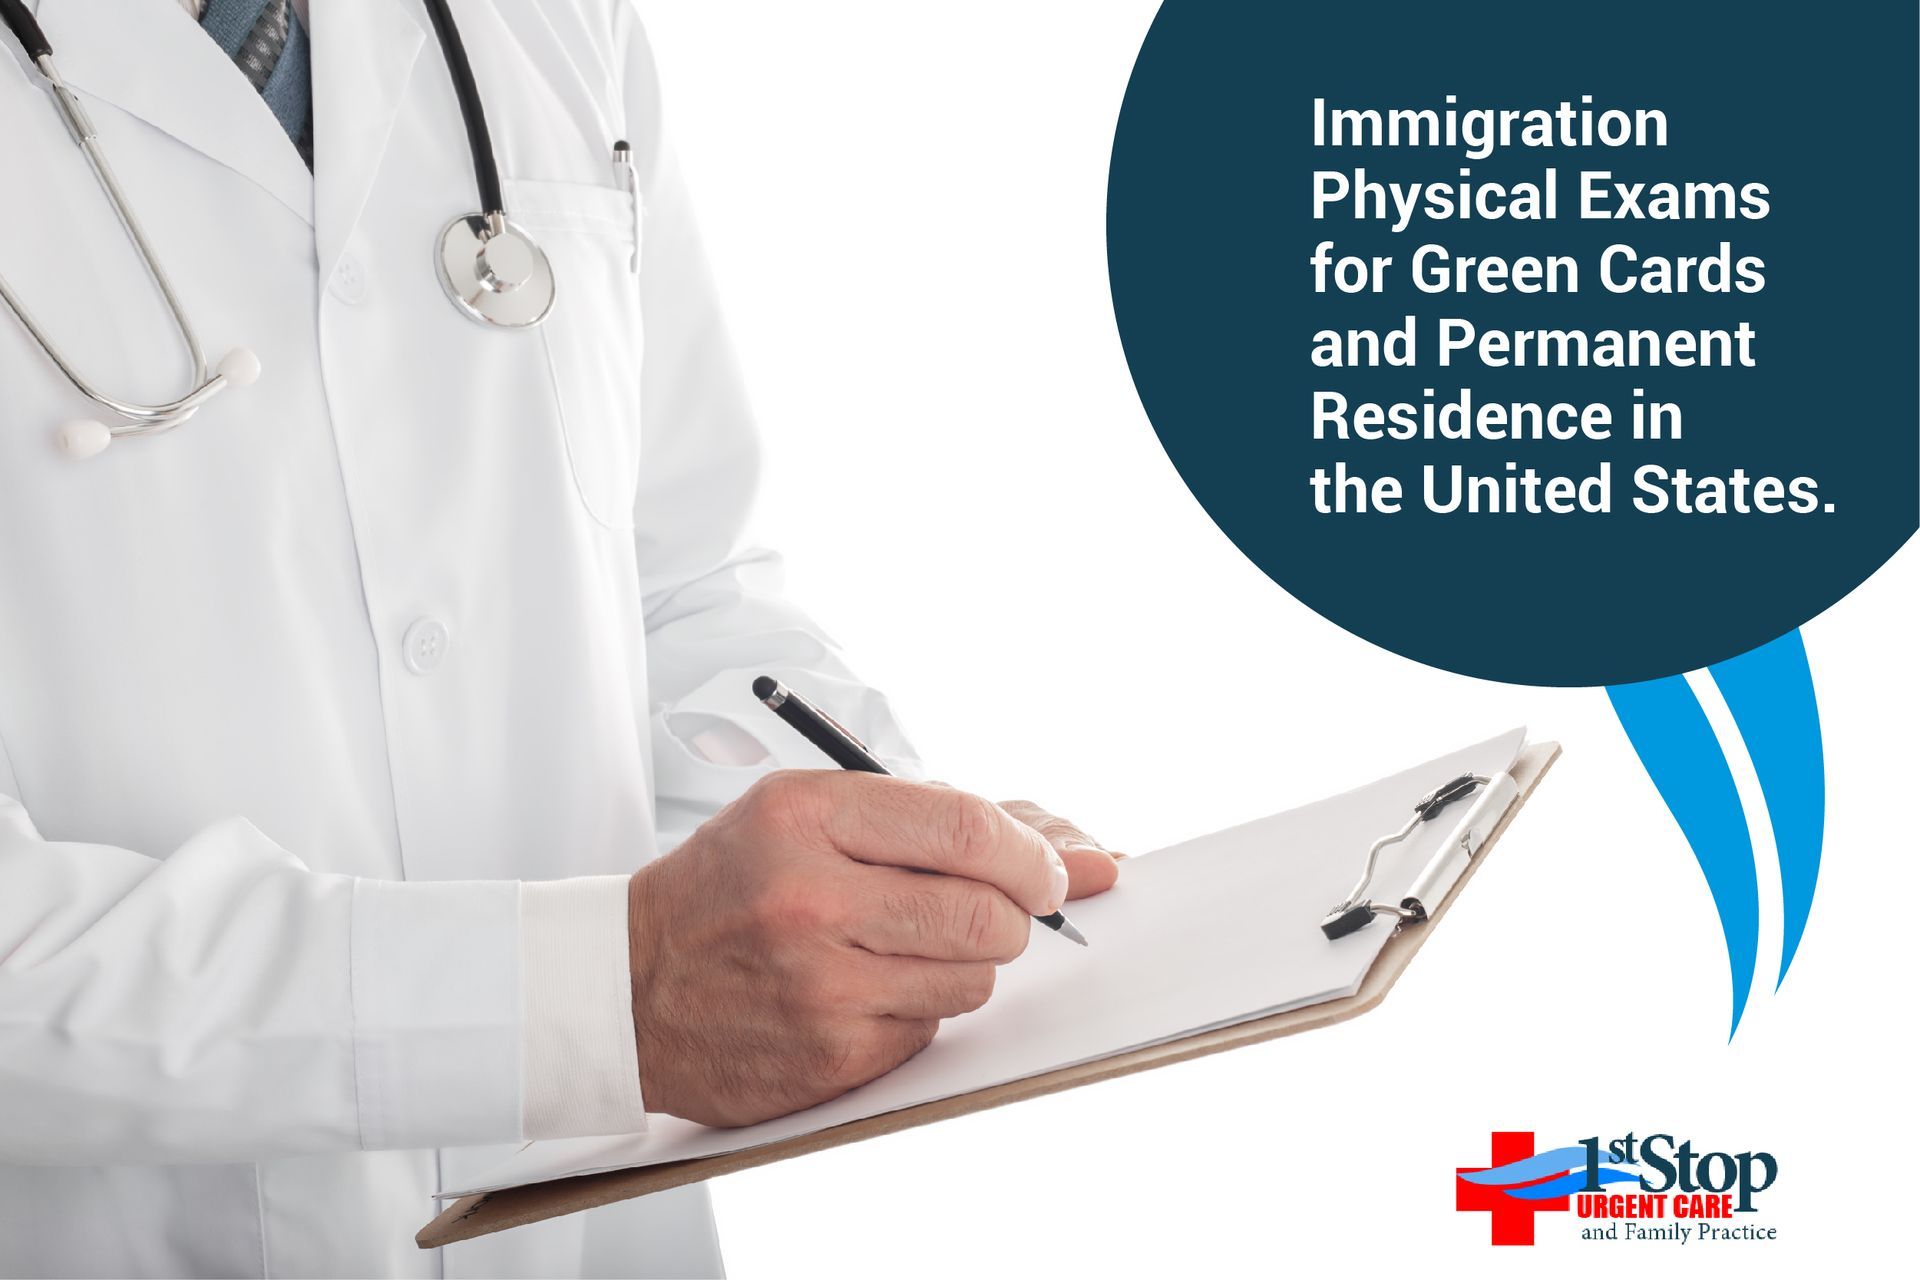 Immigration Physical Exams for Green Cards and Permanent Residence in the United States